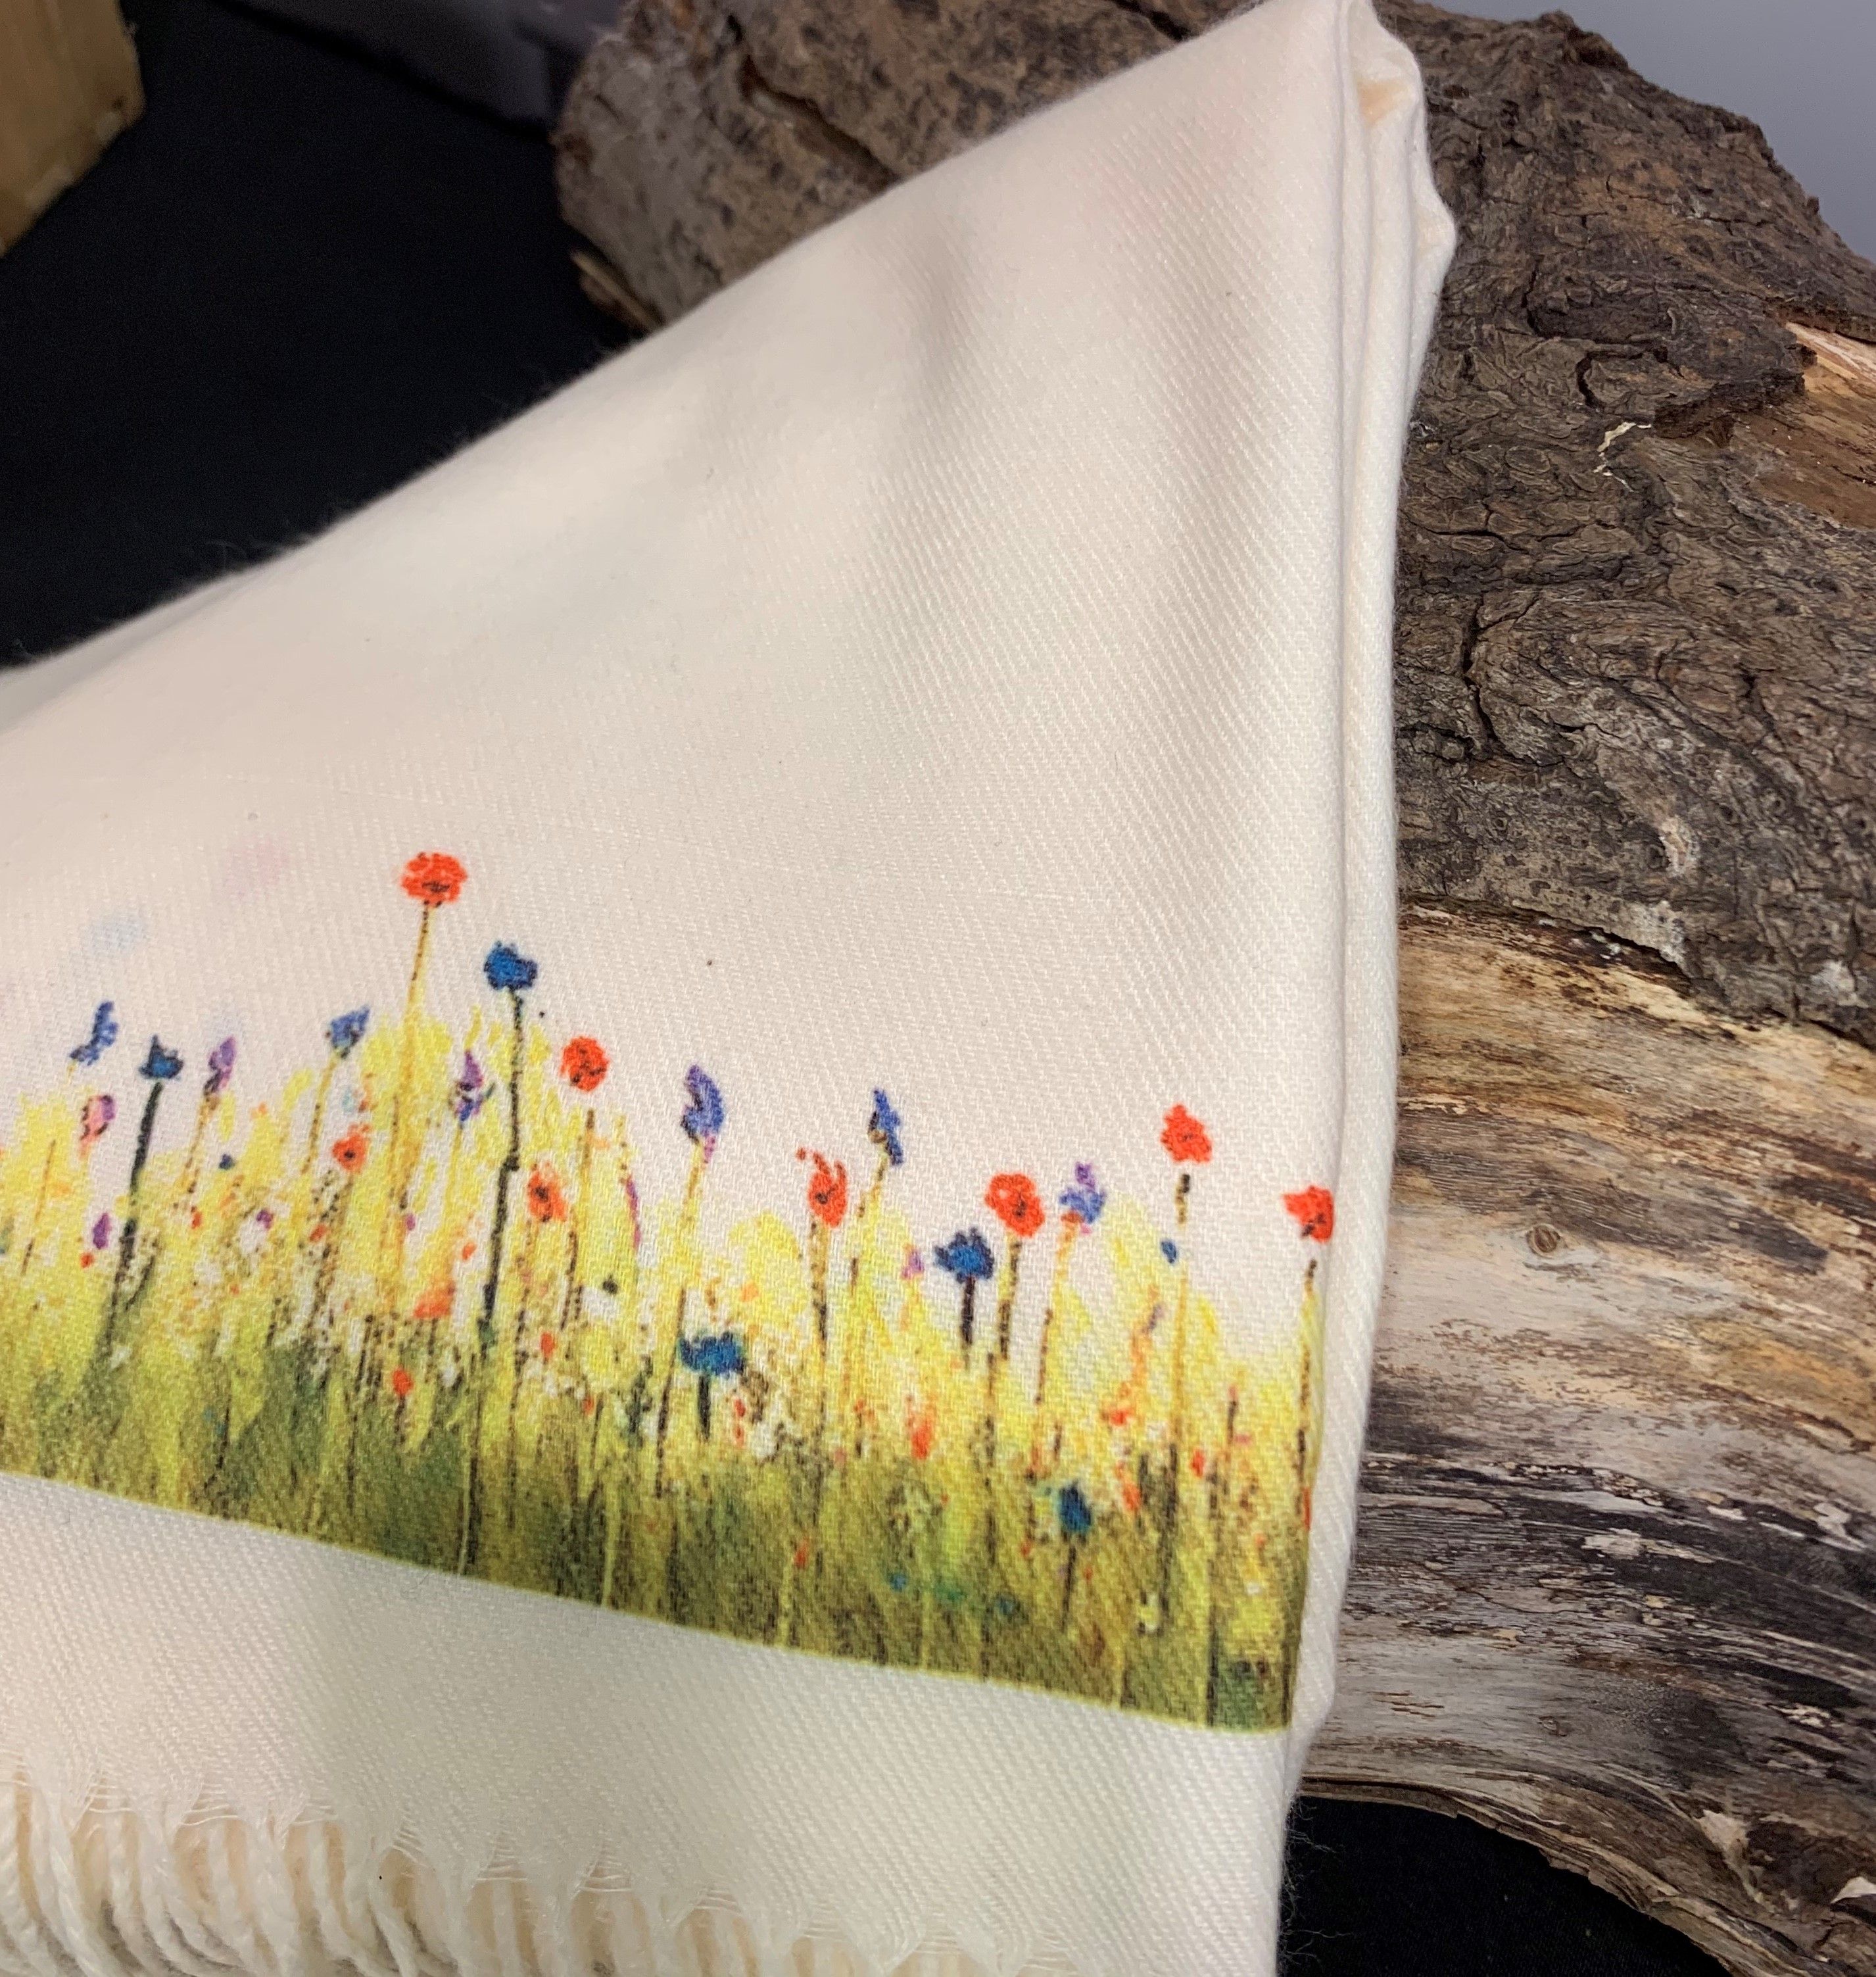 Wildflowers handprinted on a Cashmere 'Feel' Scarf